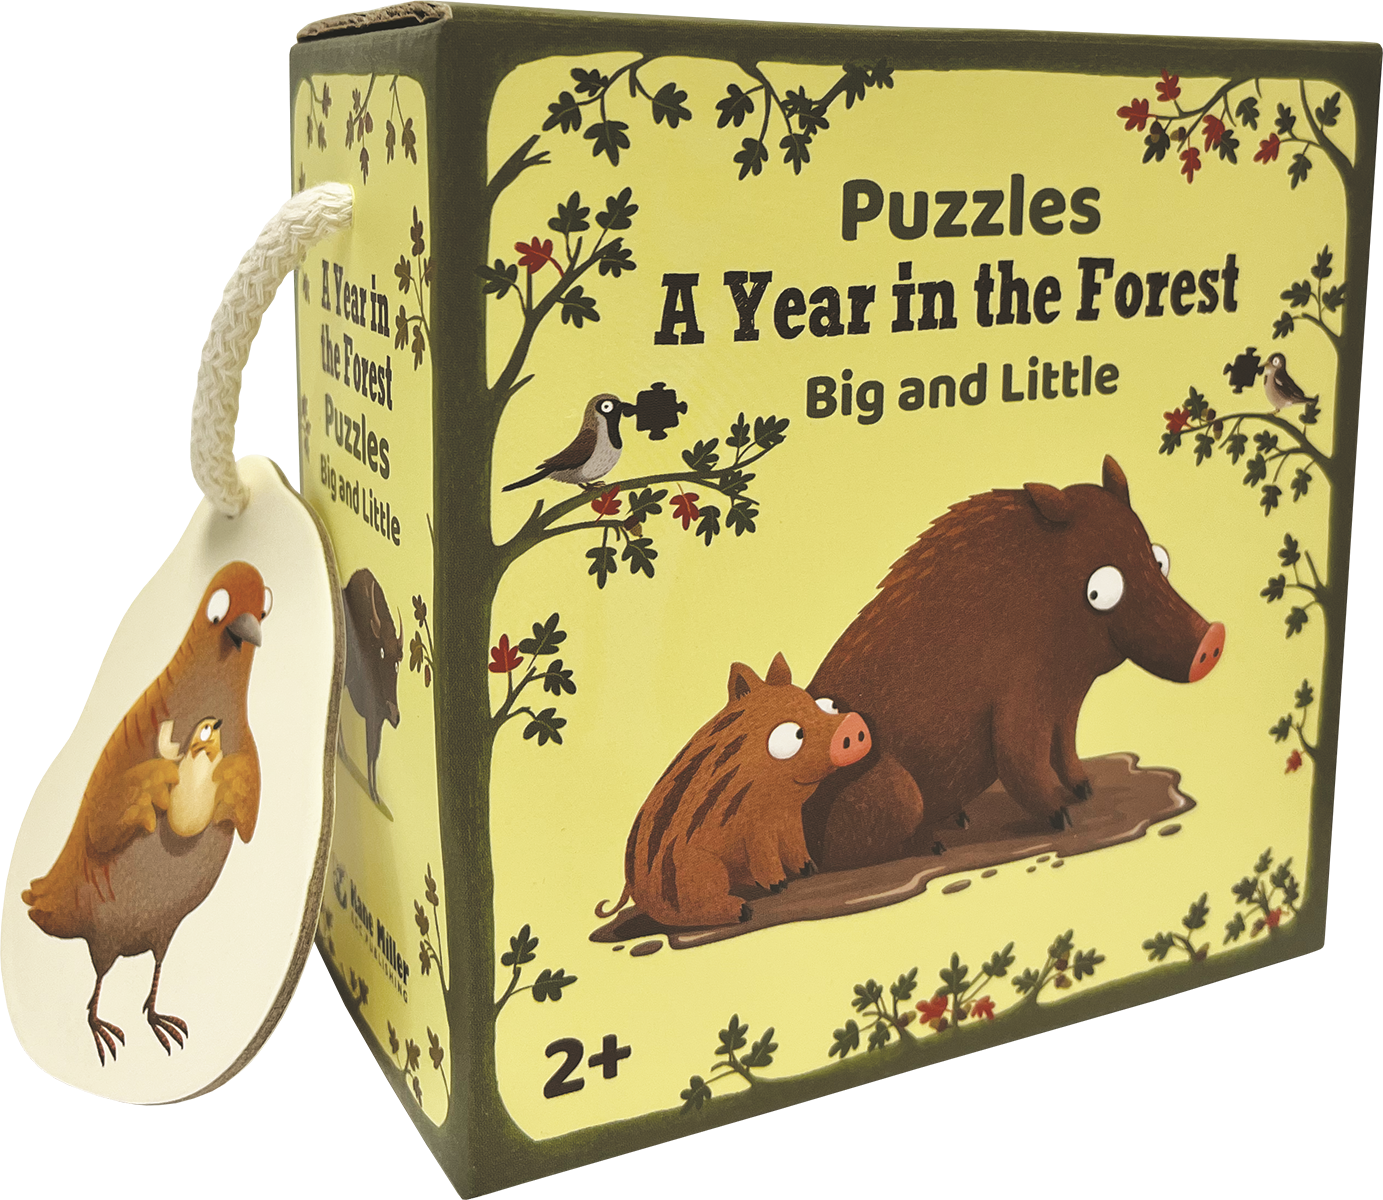 EDC Publishing - A Year in the Forest Puzzles, Big and Little